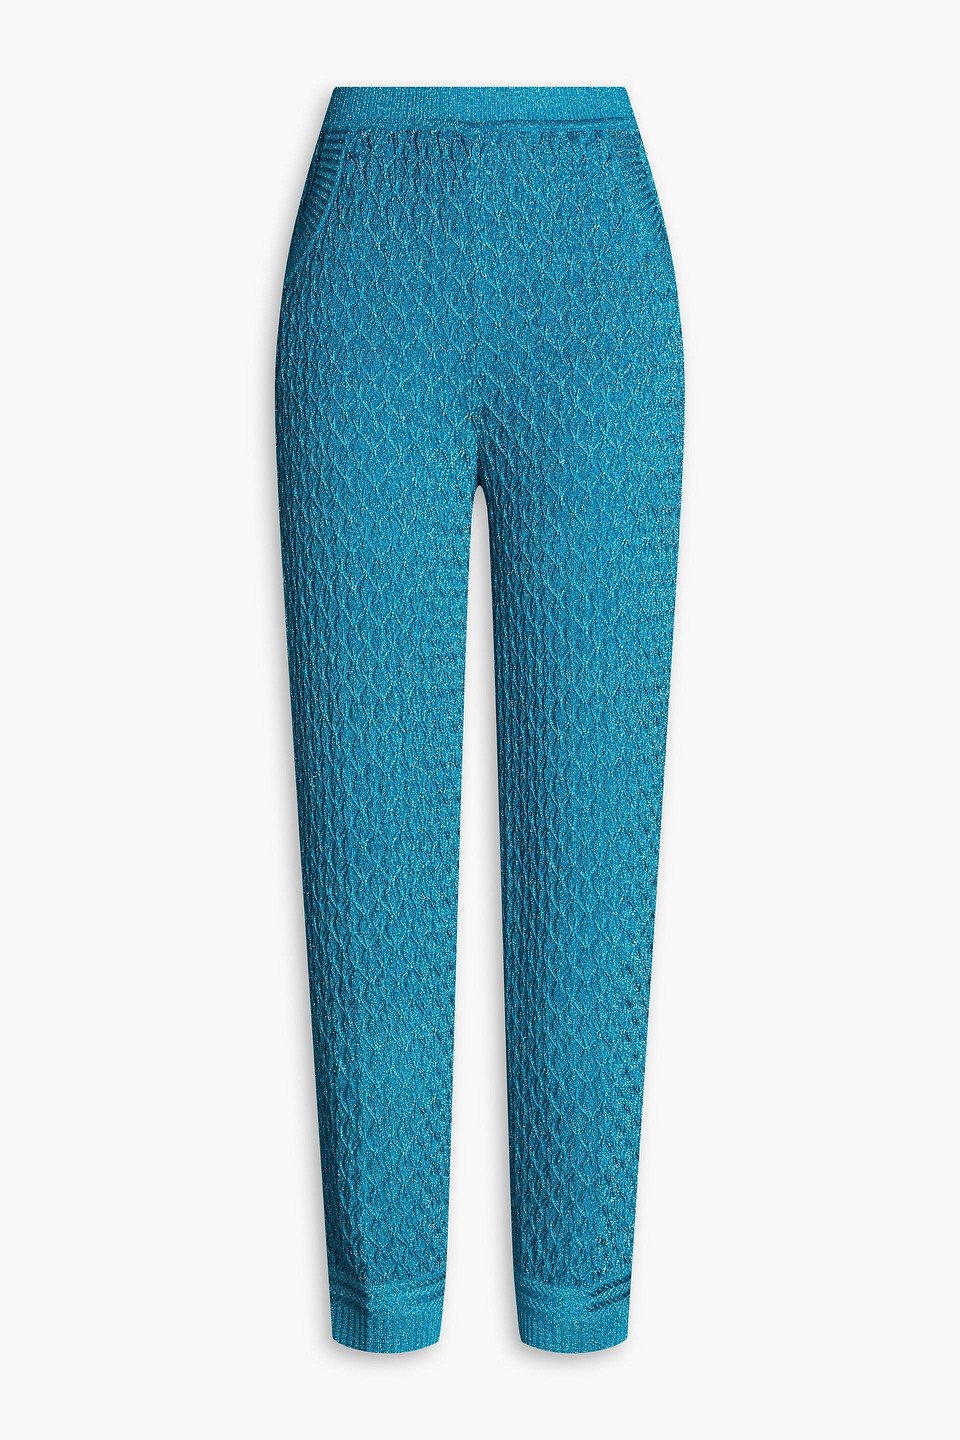 Best Seller Marni's Cable Knit PRINTED Leggings, Cornflower Blue Women's  Casual Cozy Wear Cute crochet Abstract Stretchy Tight Pants 